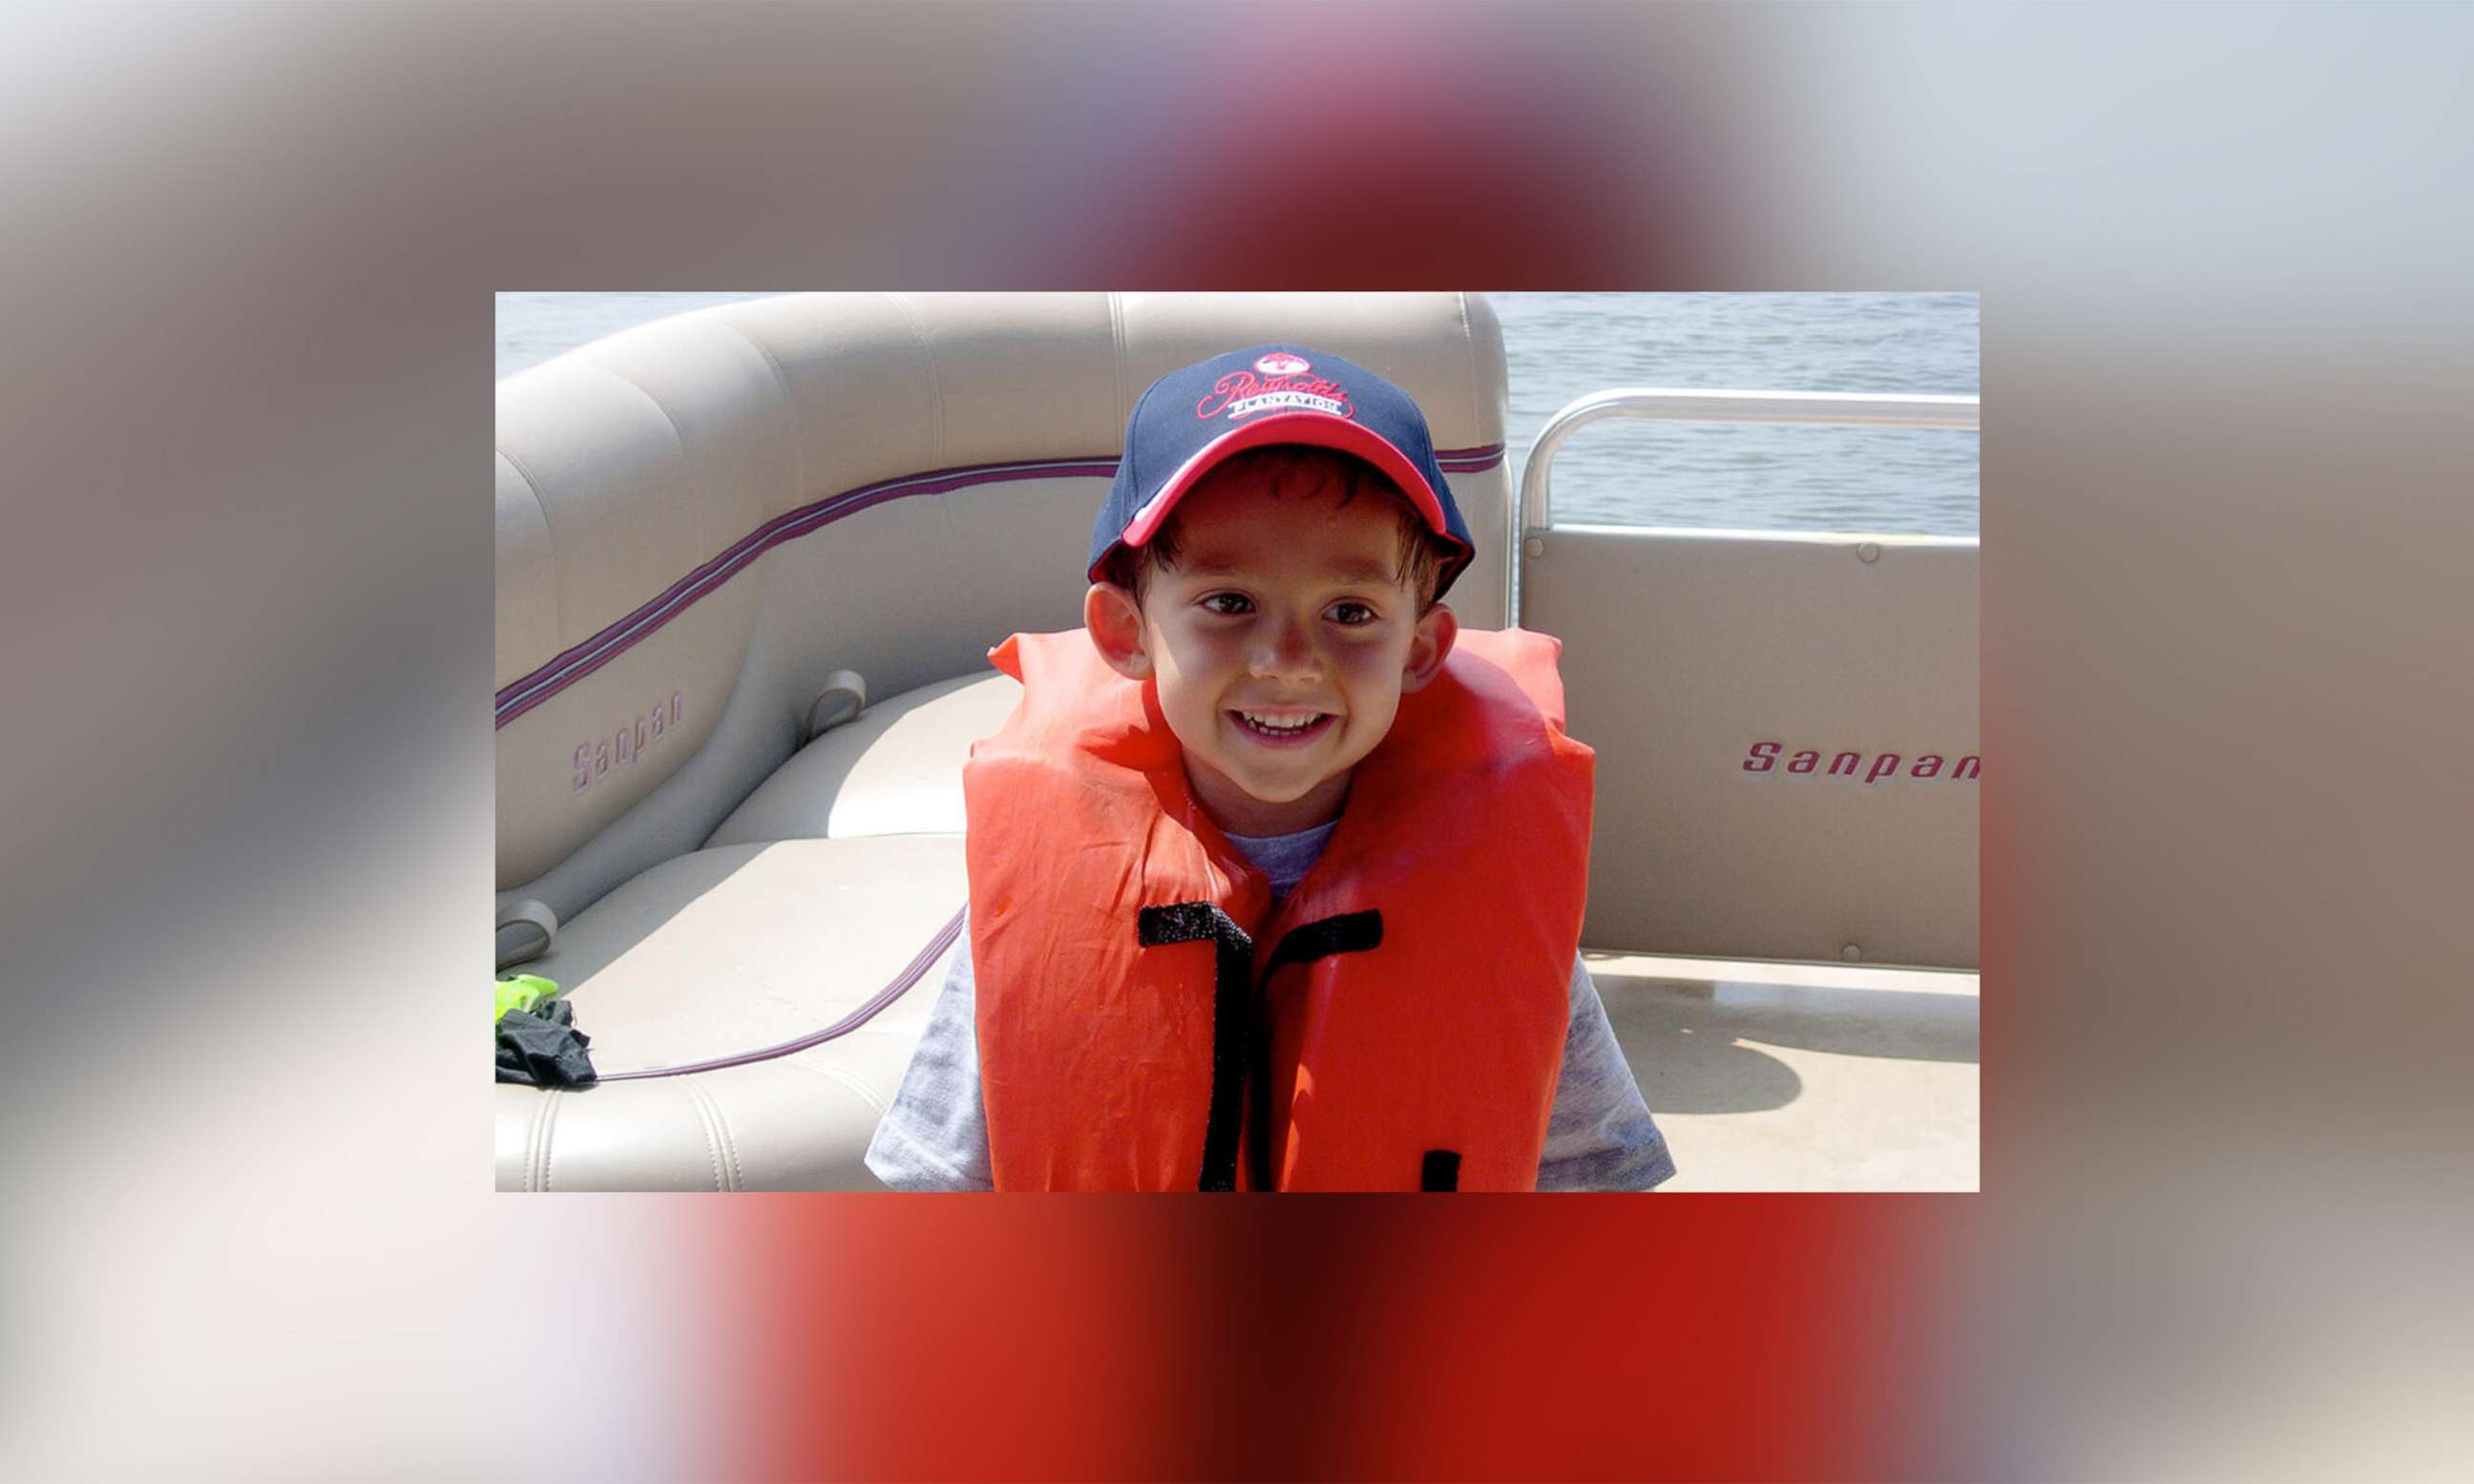 PHOTO:  Zachary Cohn died in 2007 following swimming pool accident that trapped him in the water for an extended period of time. He was six years old at the time.